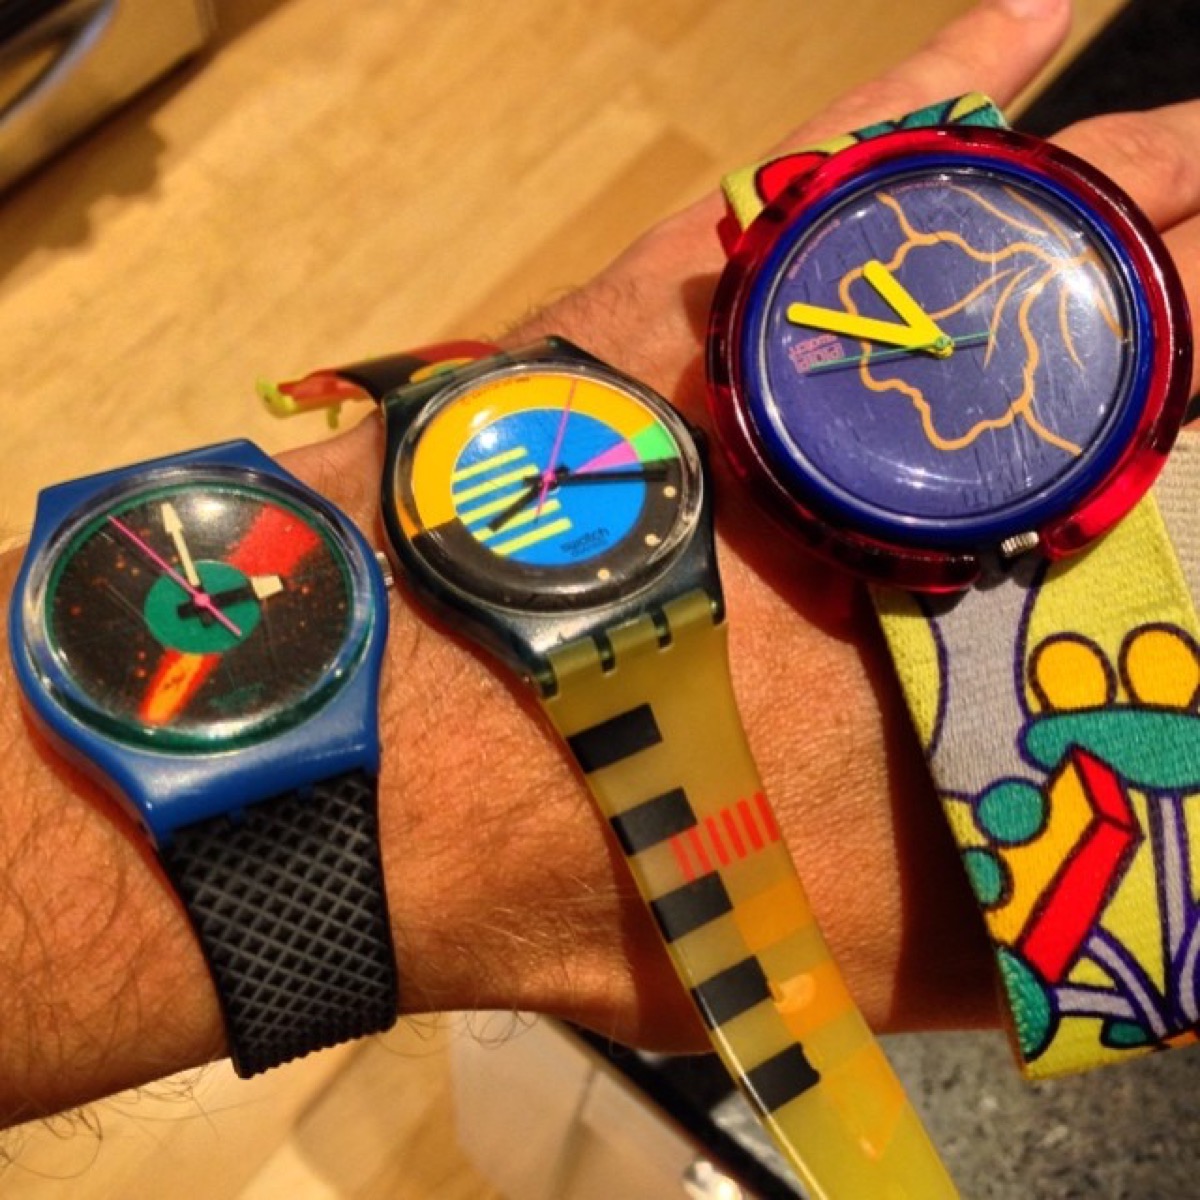 Swatch watches cool 1980s style